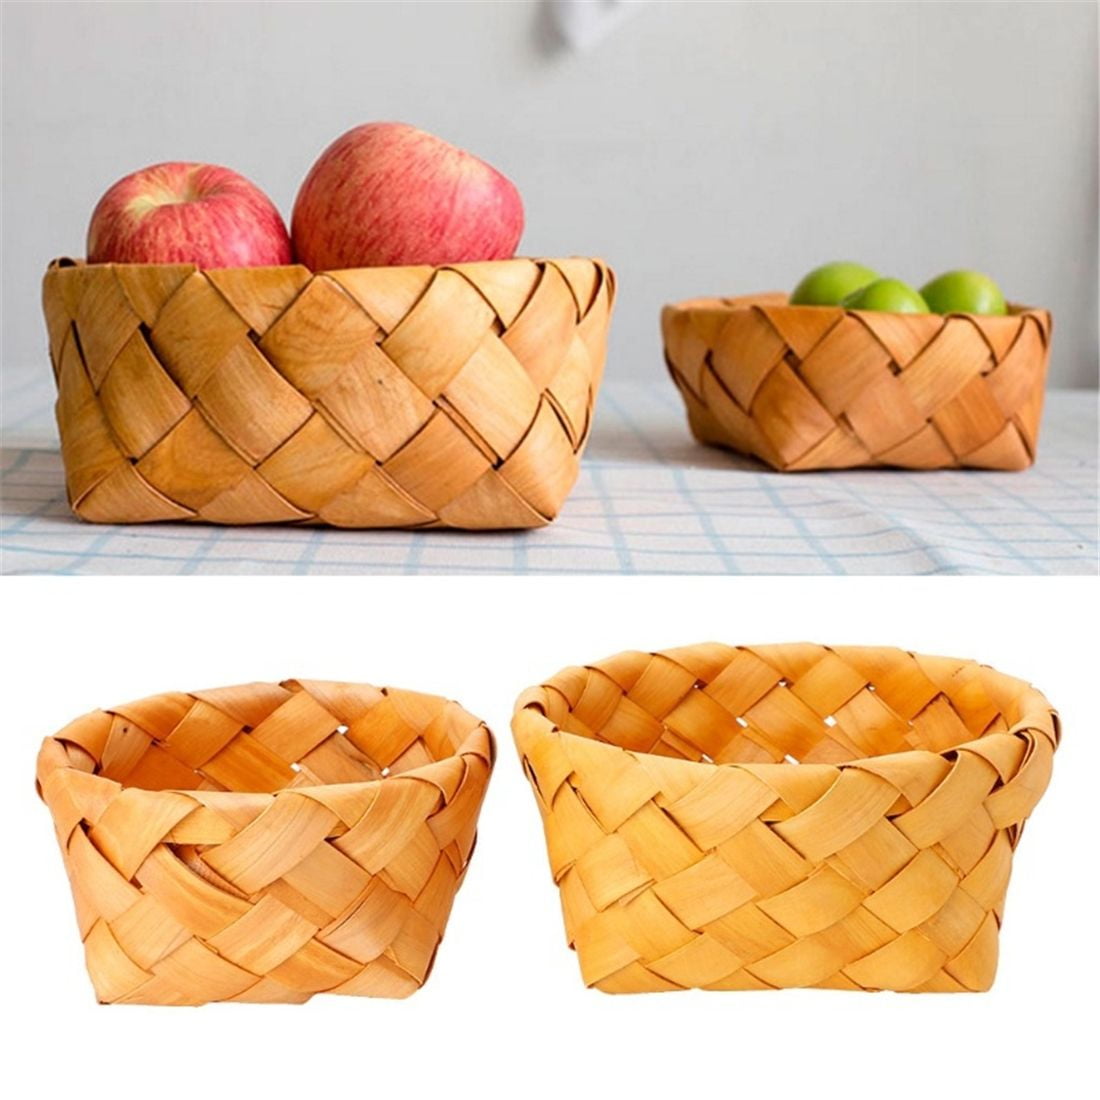 Creative Hand Woven Round Fruit Basket Bread Wood Picnic Storage Bread Mold Grass Huge Keys Sizes Neutral Rollers Living Cute Multicolor Various Organizer Entryway Desk Plastic Coffee 